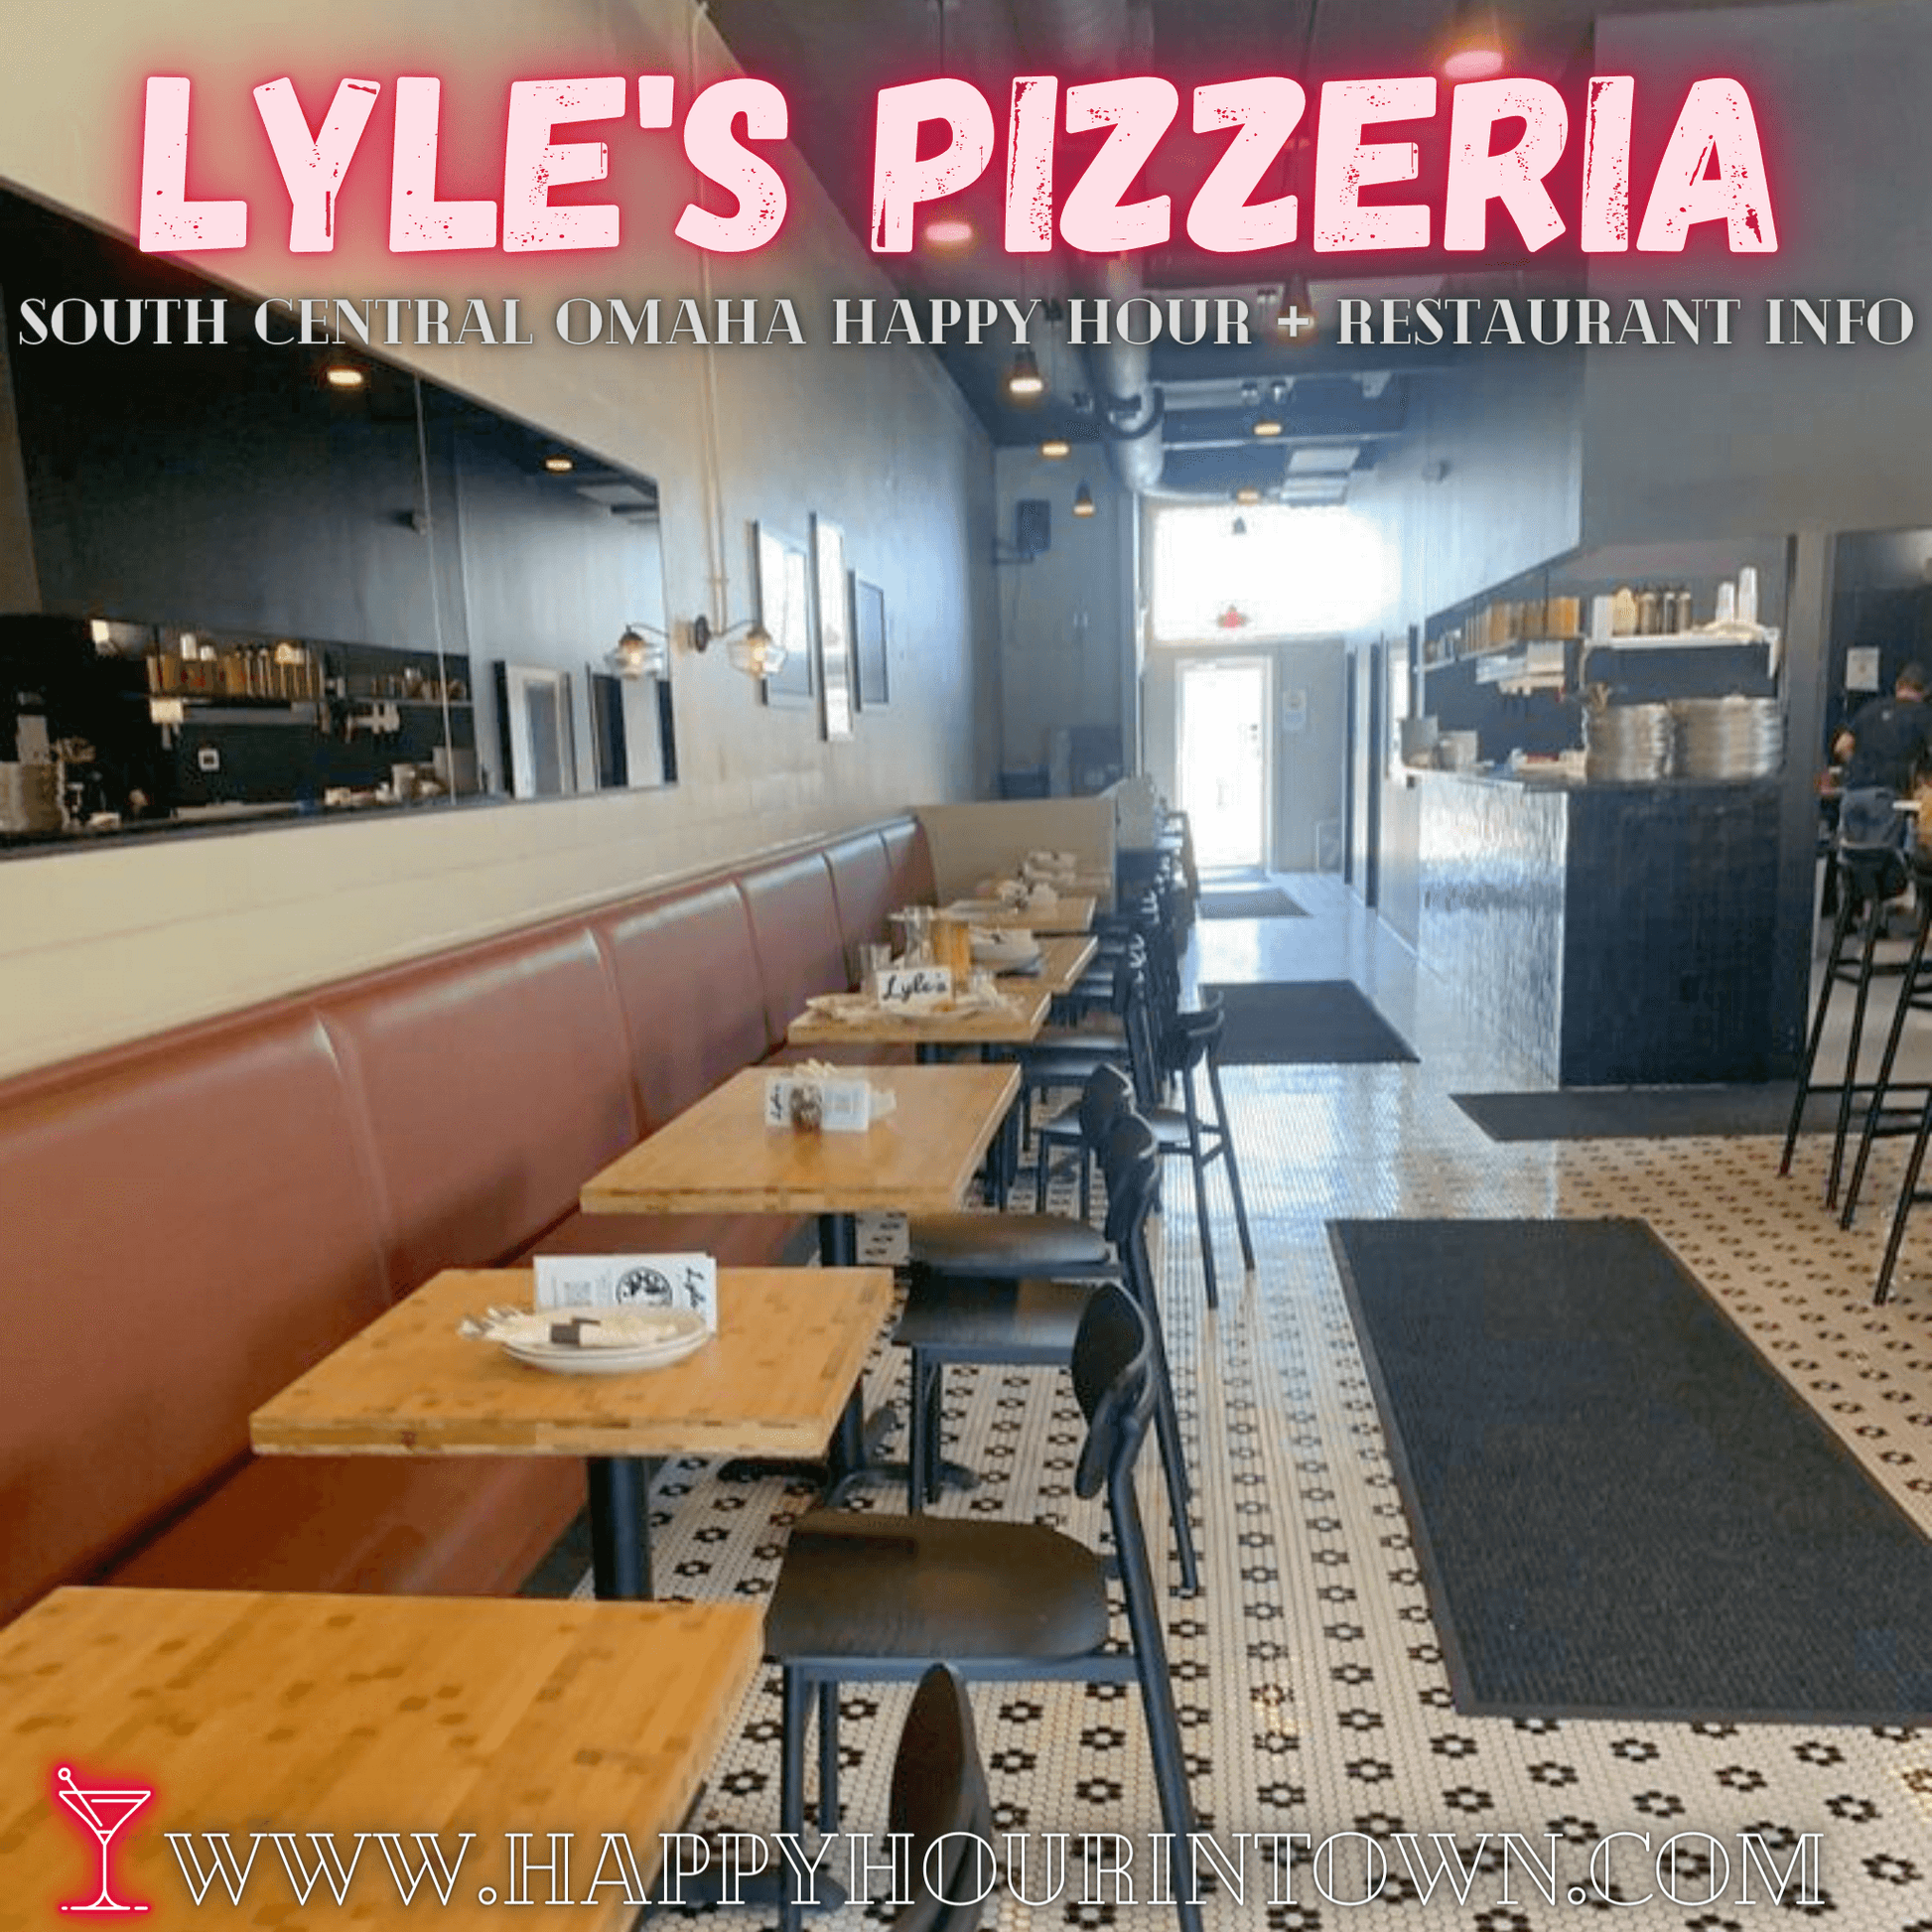 lyles pizzeria omaha happy hour in town